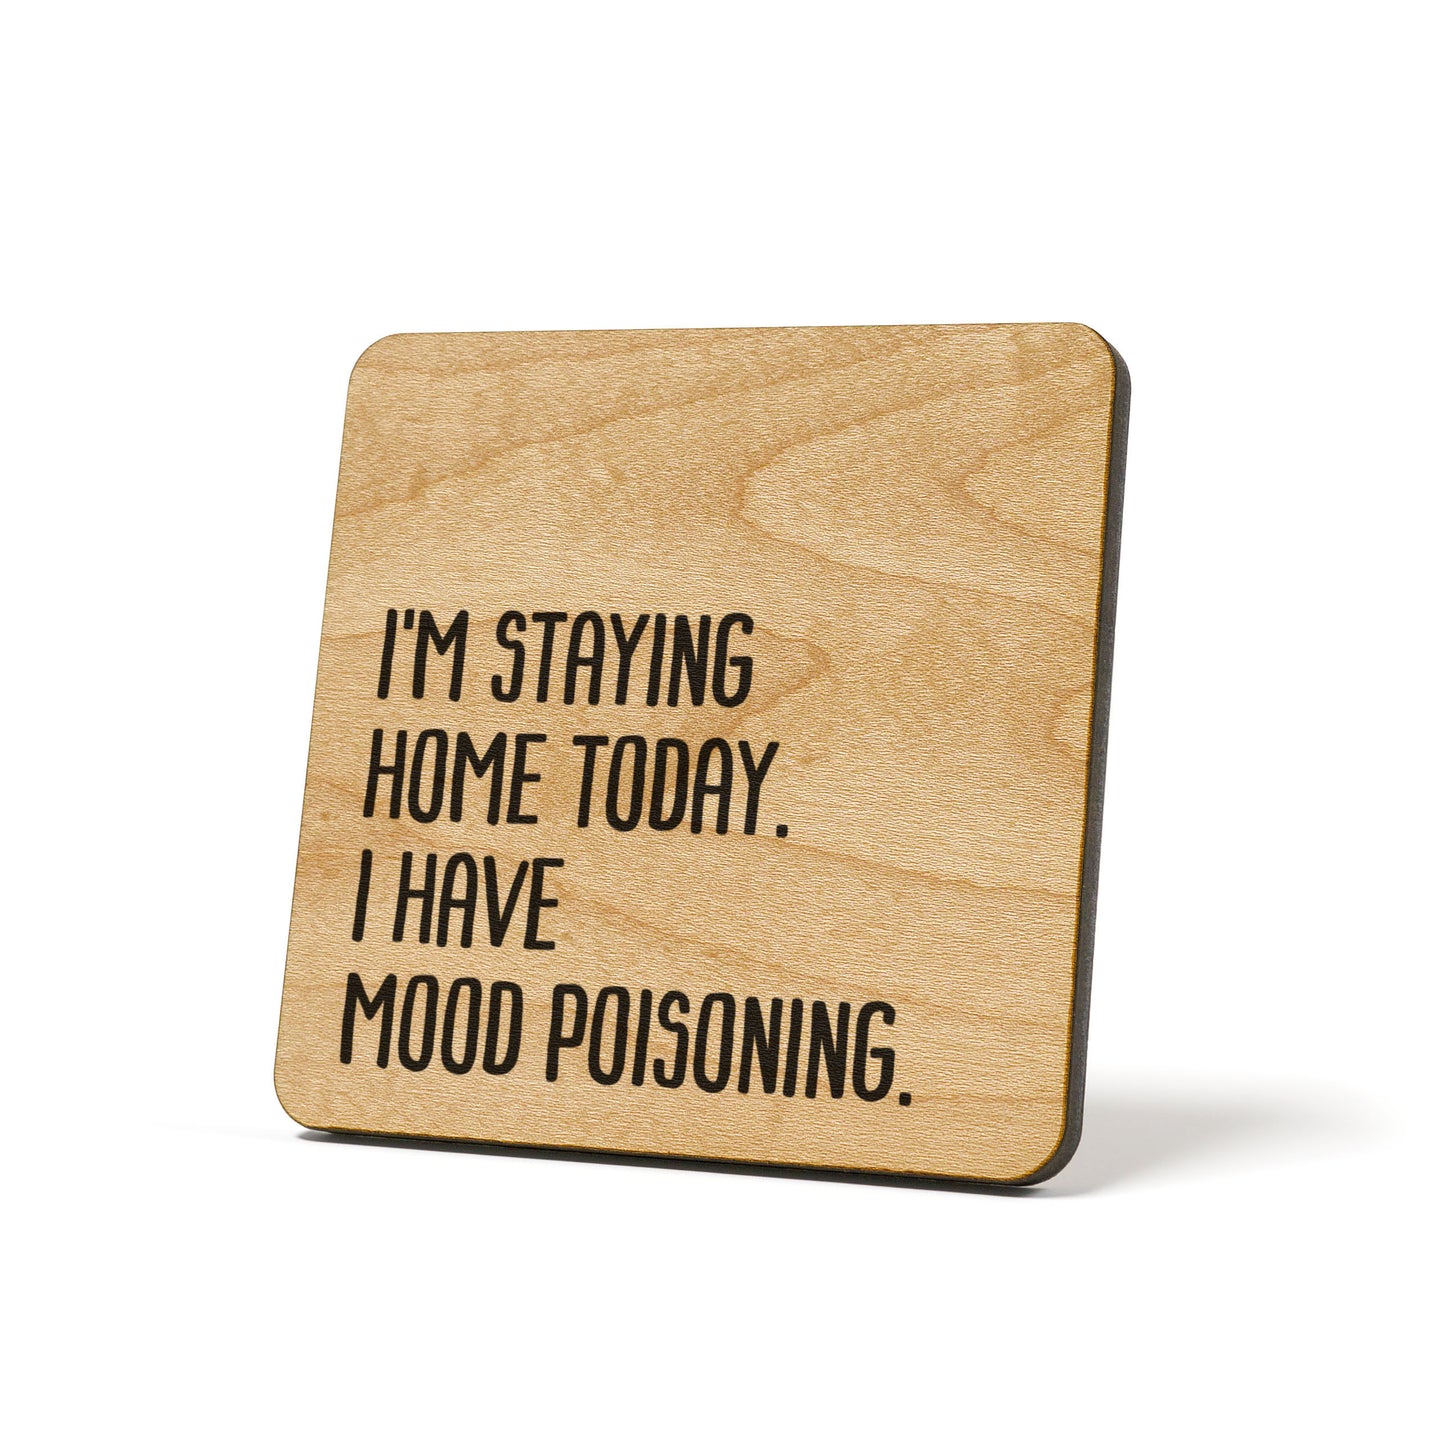 I'm staying home today. I have mood poisoning. Quote Coaster